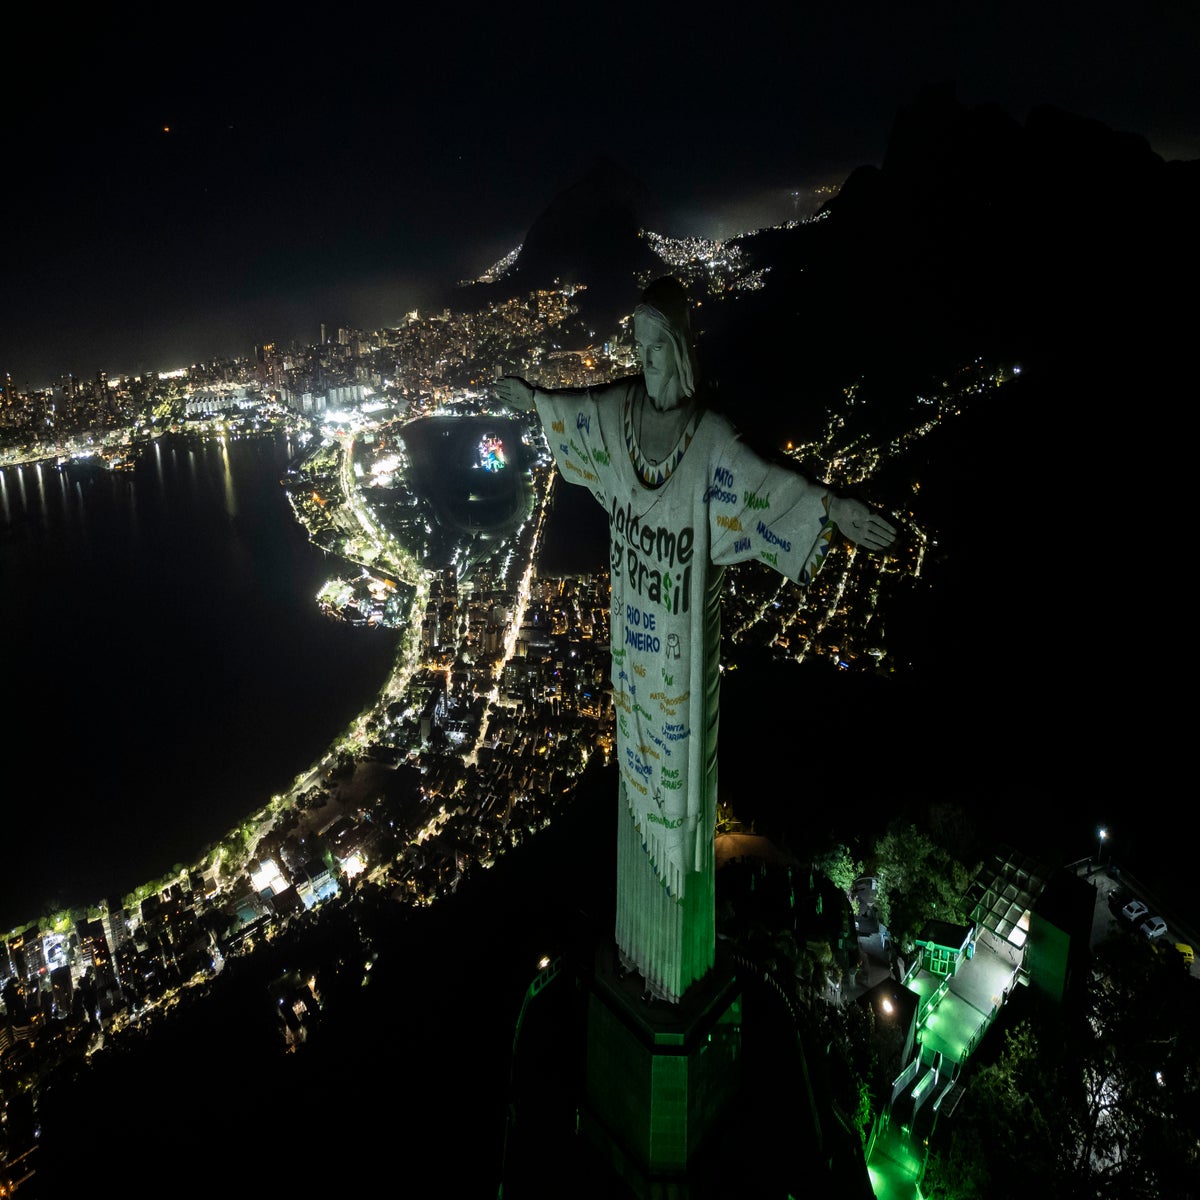 Taylor Swift welcomed to Brazil with decorated Christ the Redeemer